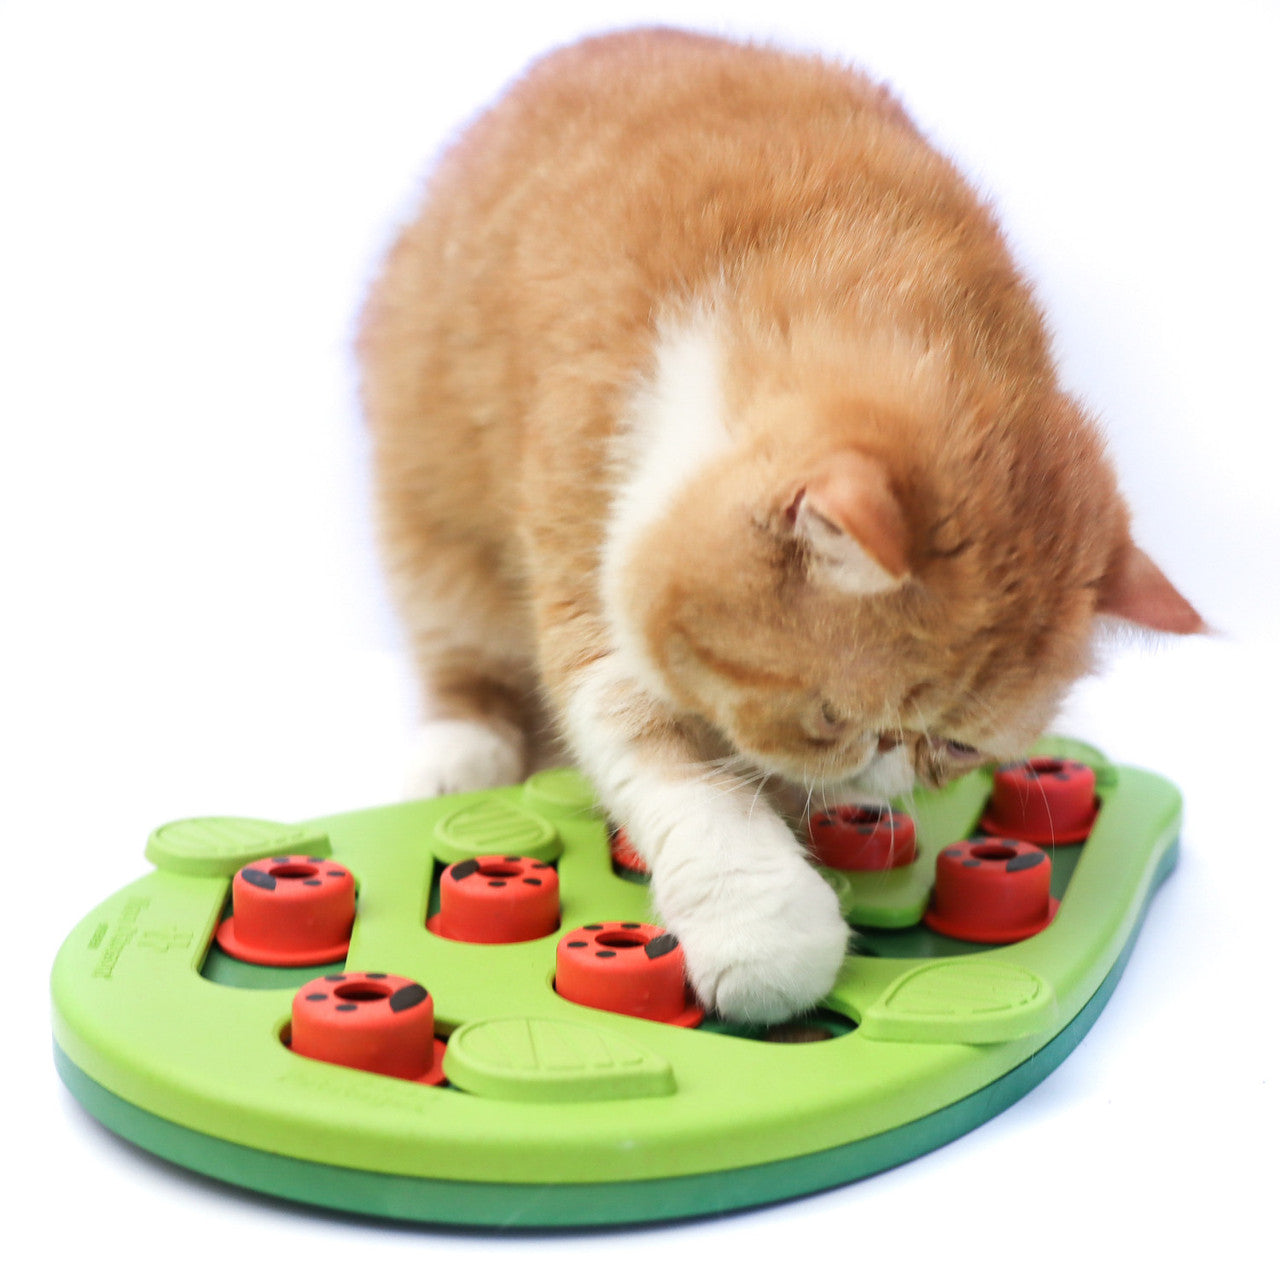 Buggin' Out Puzzle & Play Cat Game